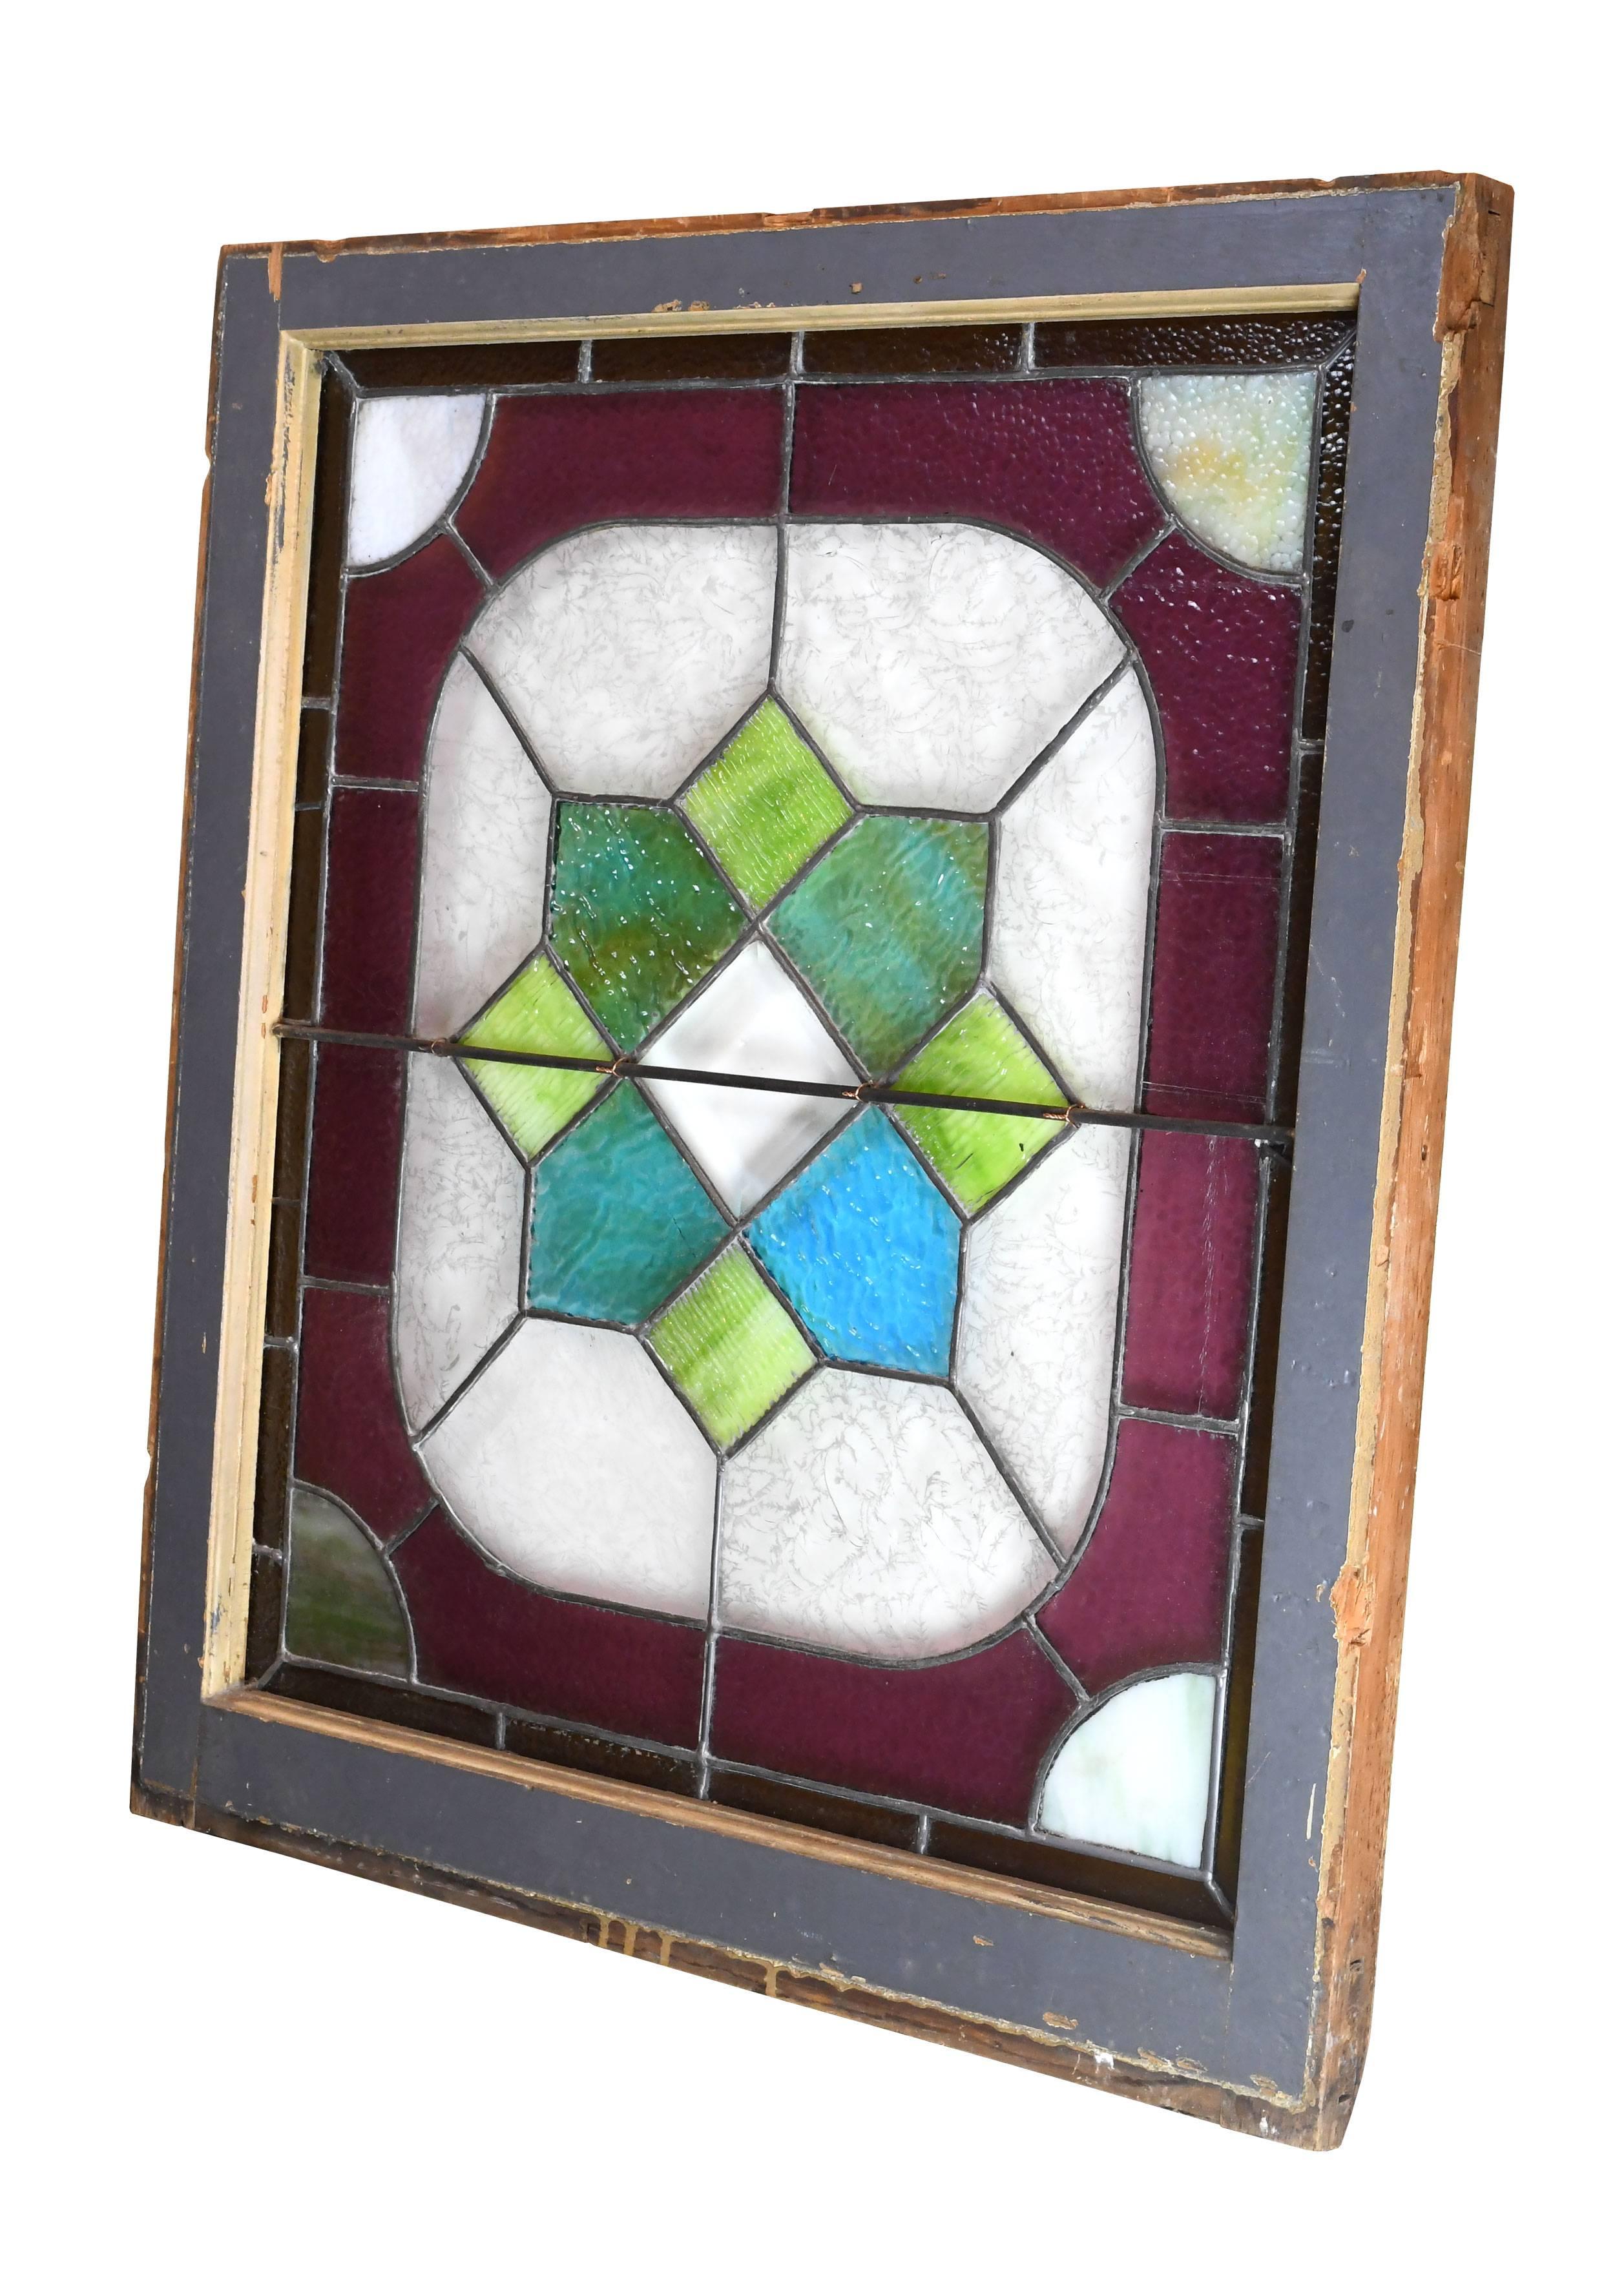 The bright, jewel-like colors of this Victorian stained glass window will brighten up any space in a pinch. Green and blue shapes surround a beautiful beveled diamond at the center, while magenta and orange glass forms a rich border that contrasts